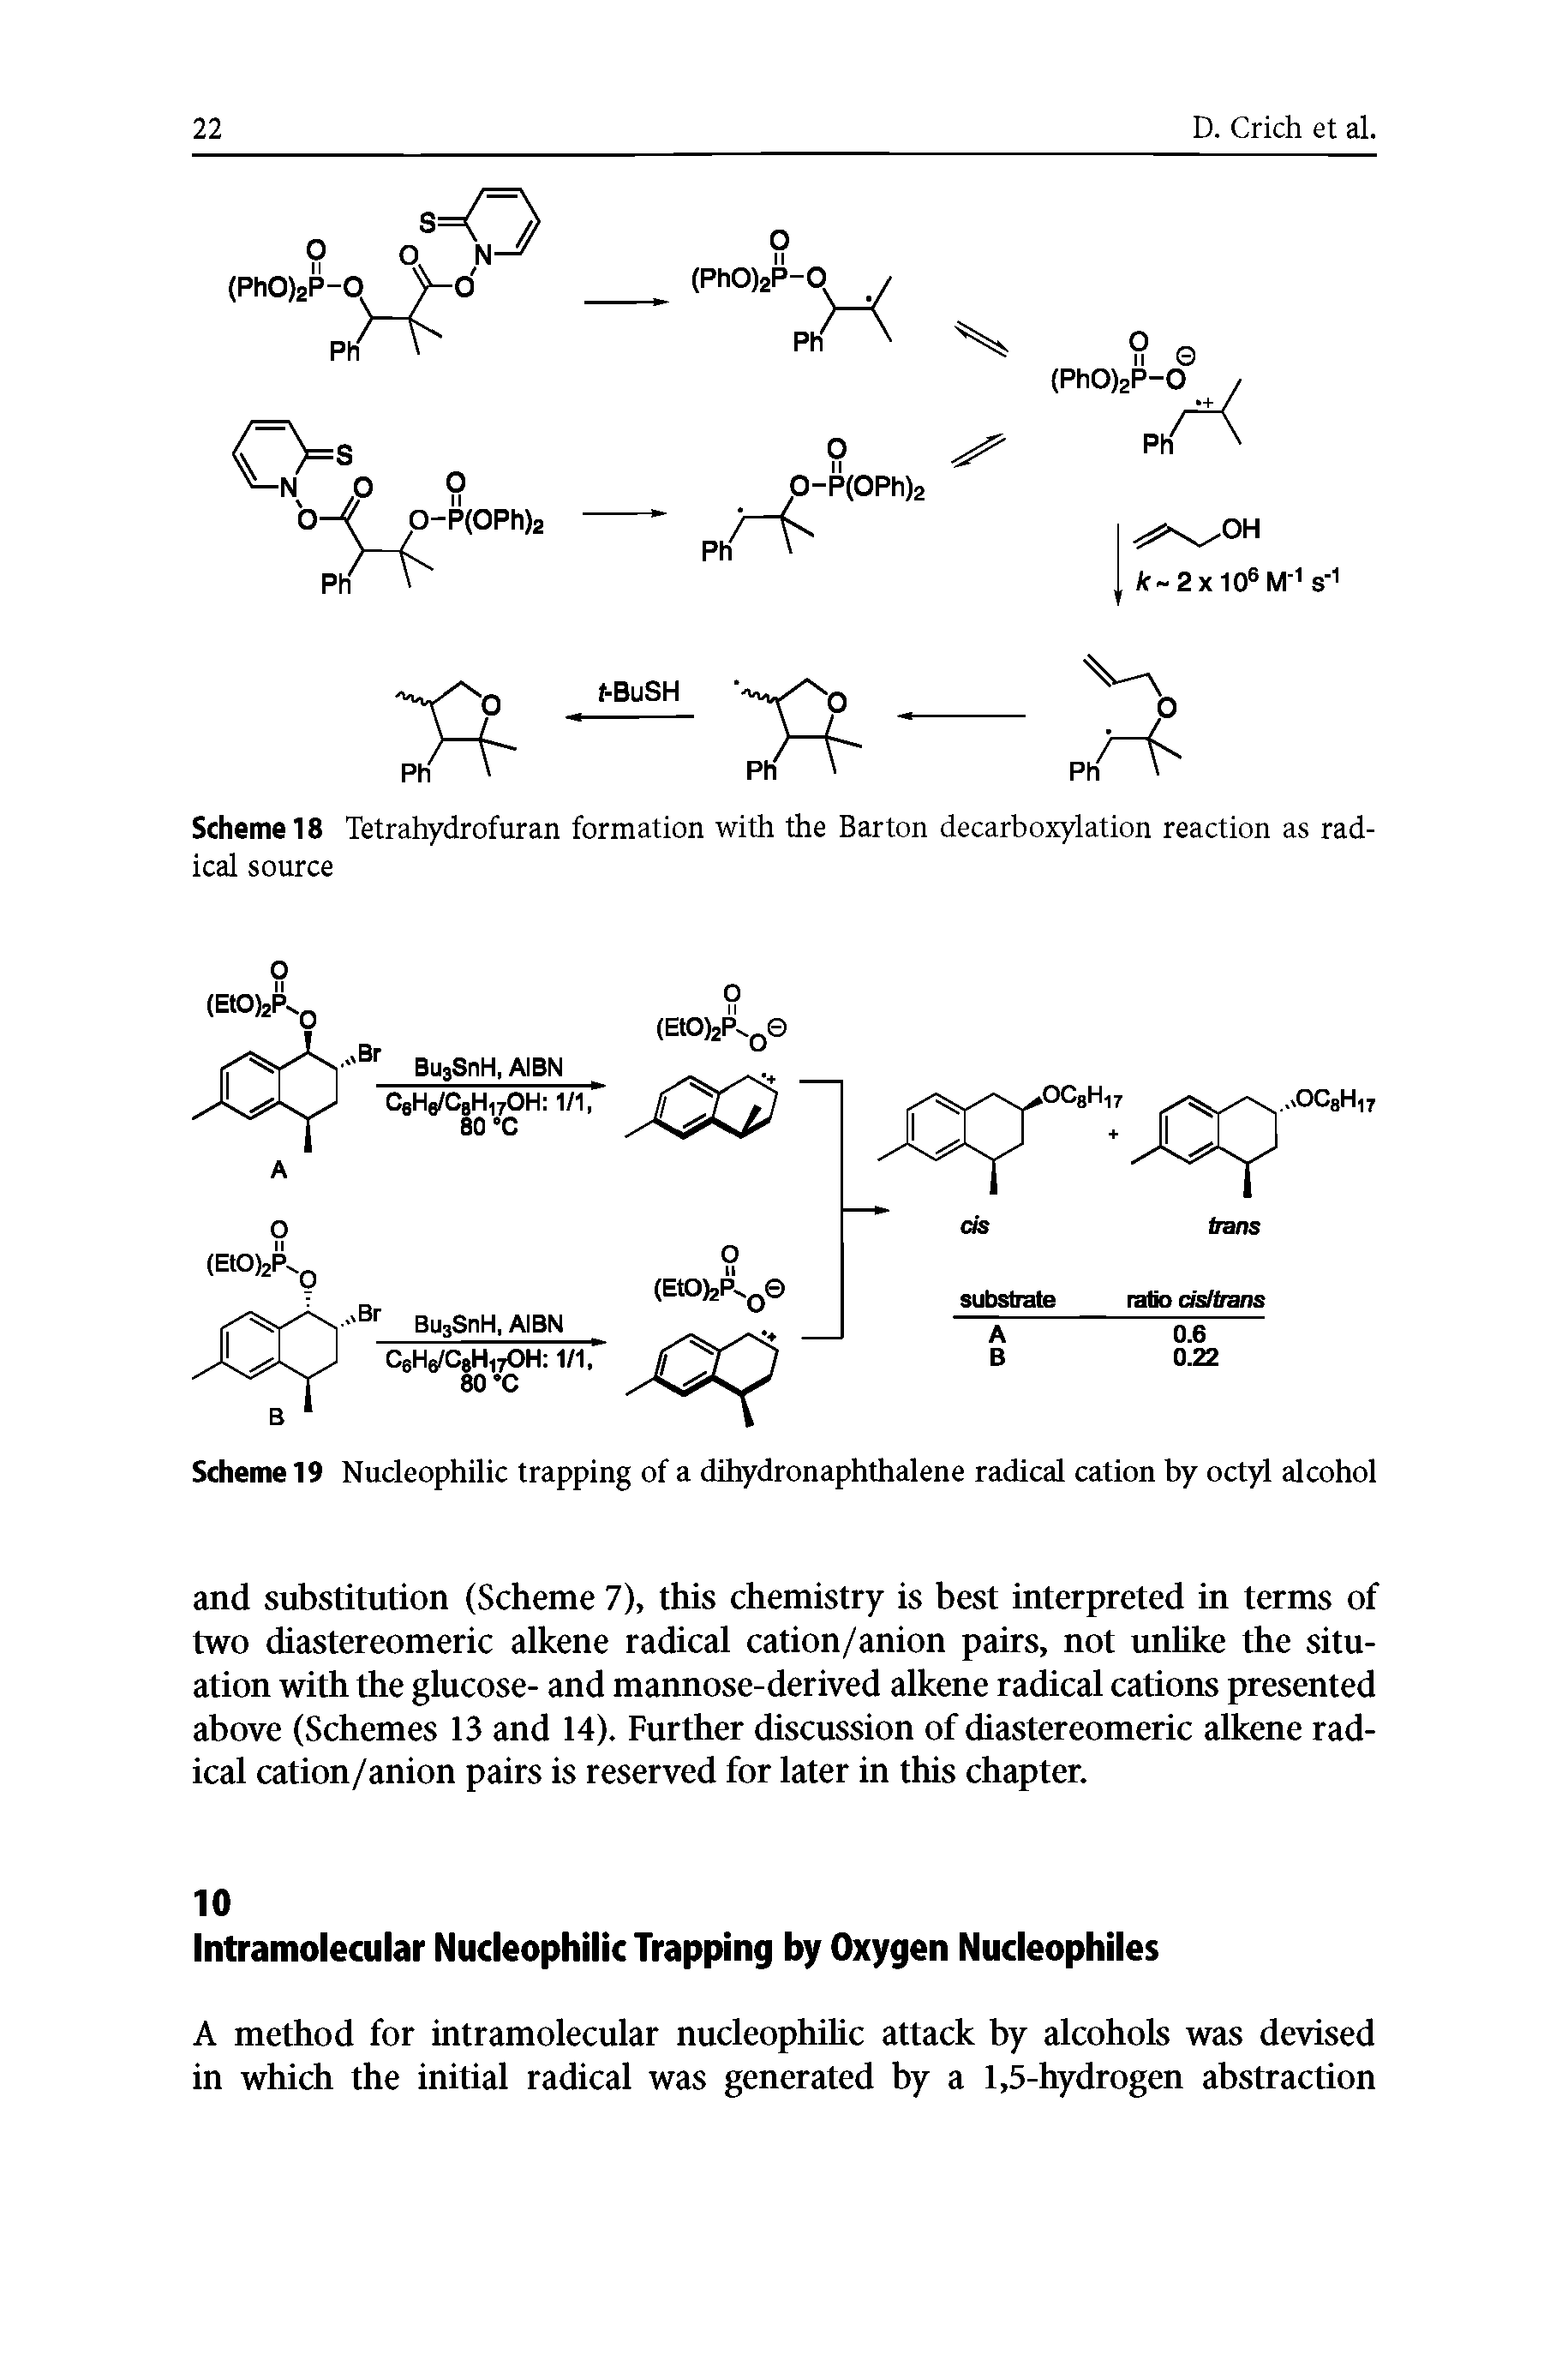 Scheme 18 Tetrahydrofuran formation with the Barton decarboxylation reaction as radical source...